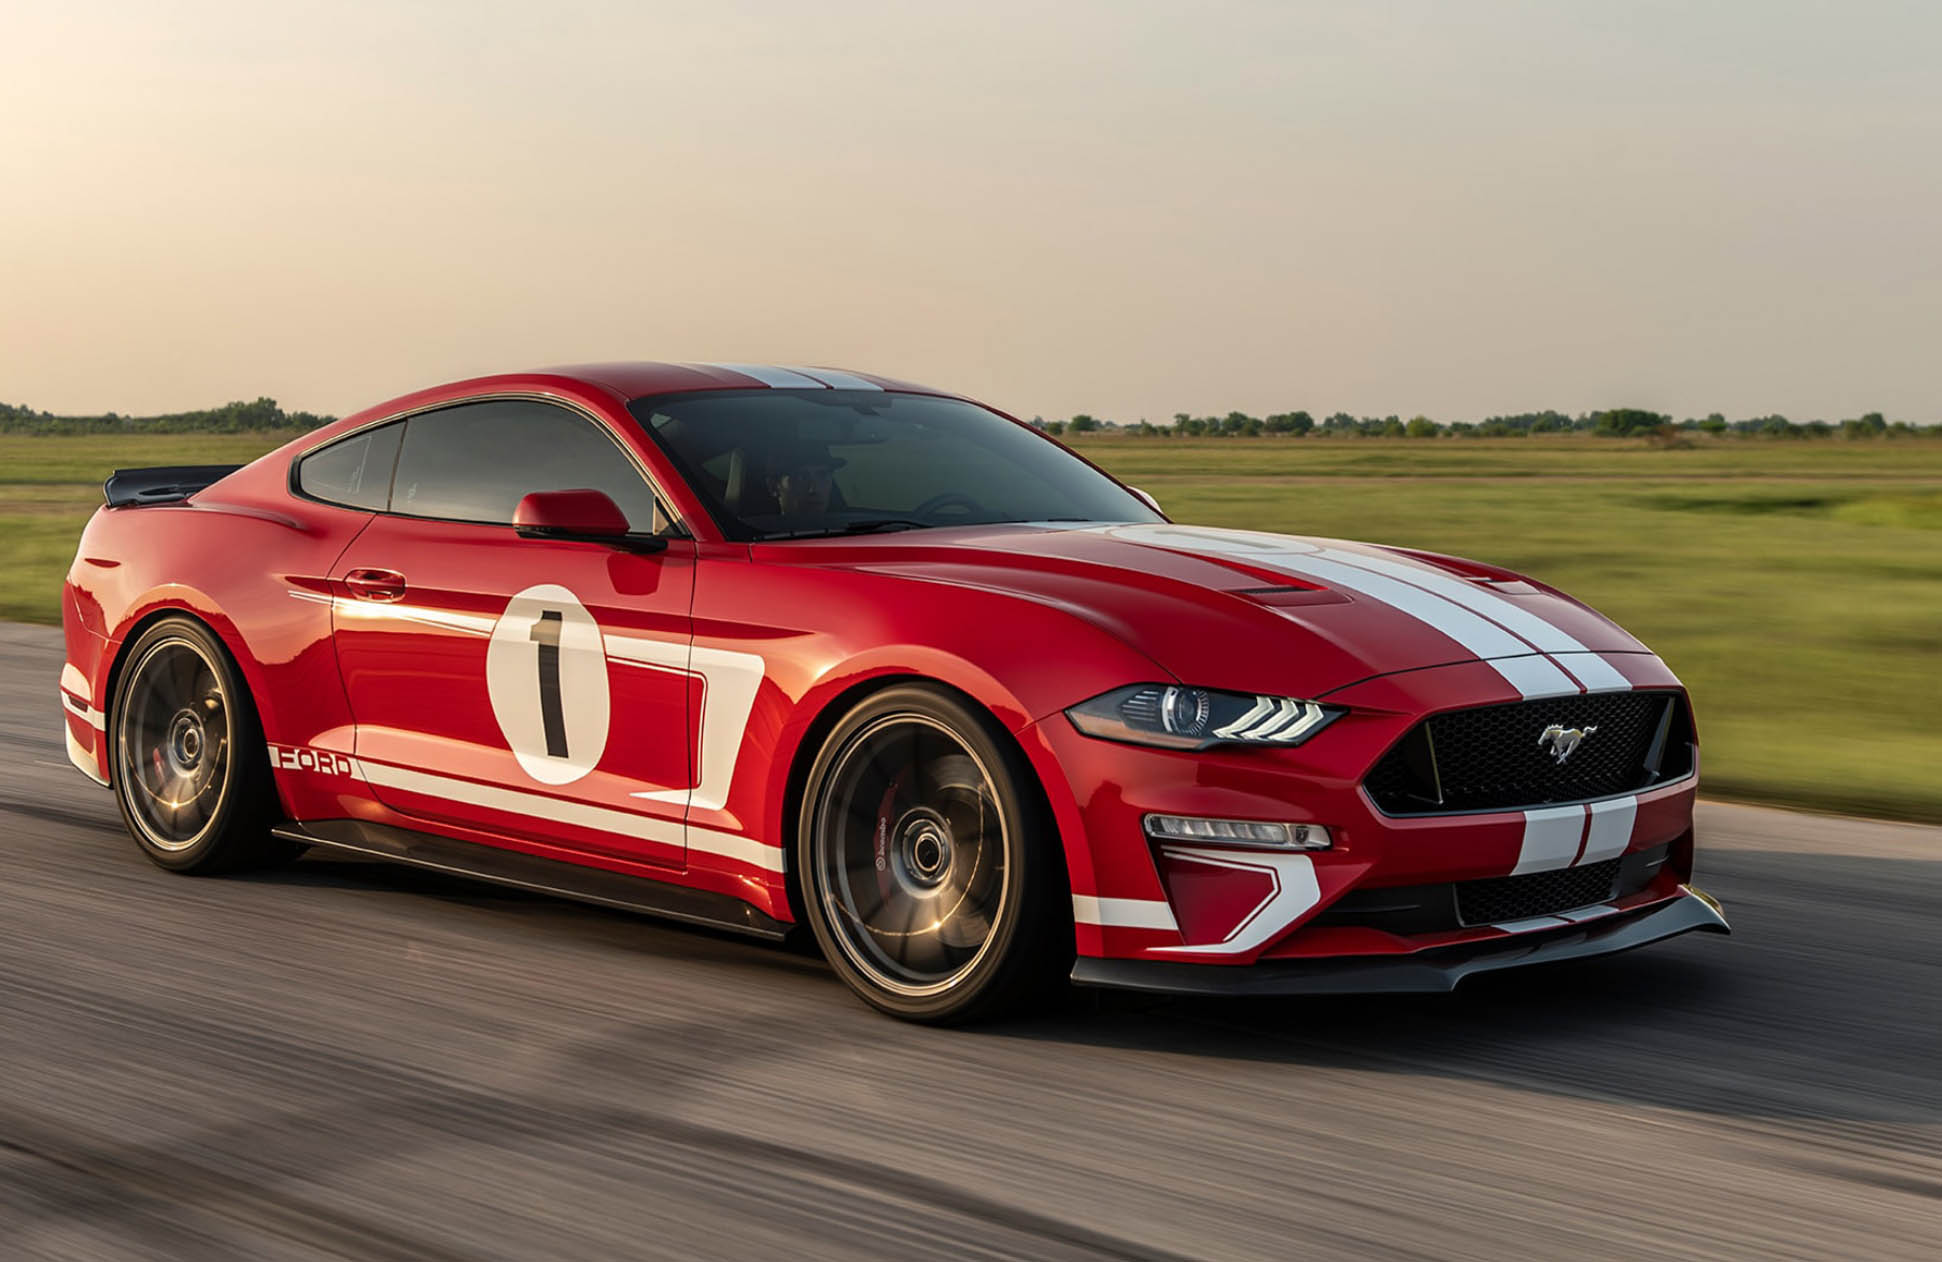 Hennessey's 10,000th car is an 808-horsepower Ford Mustang